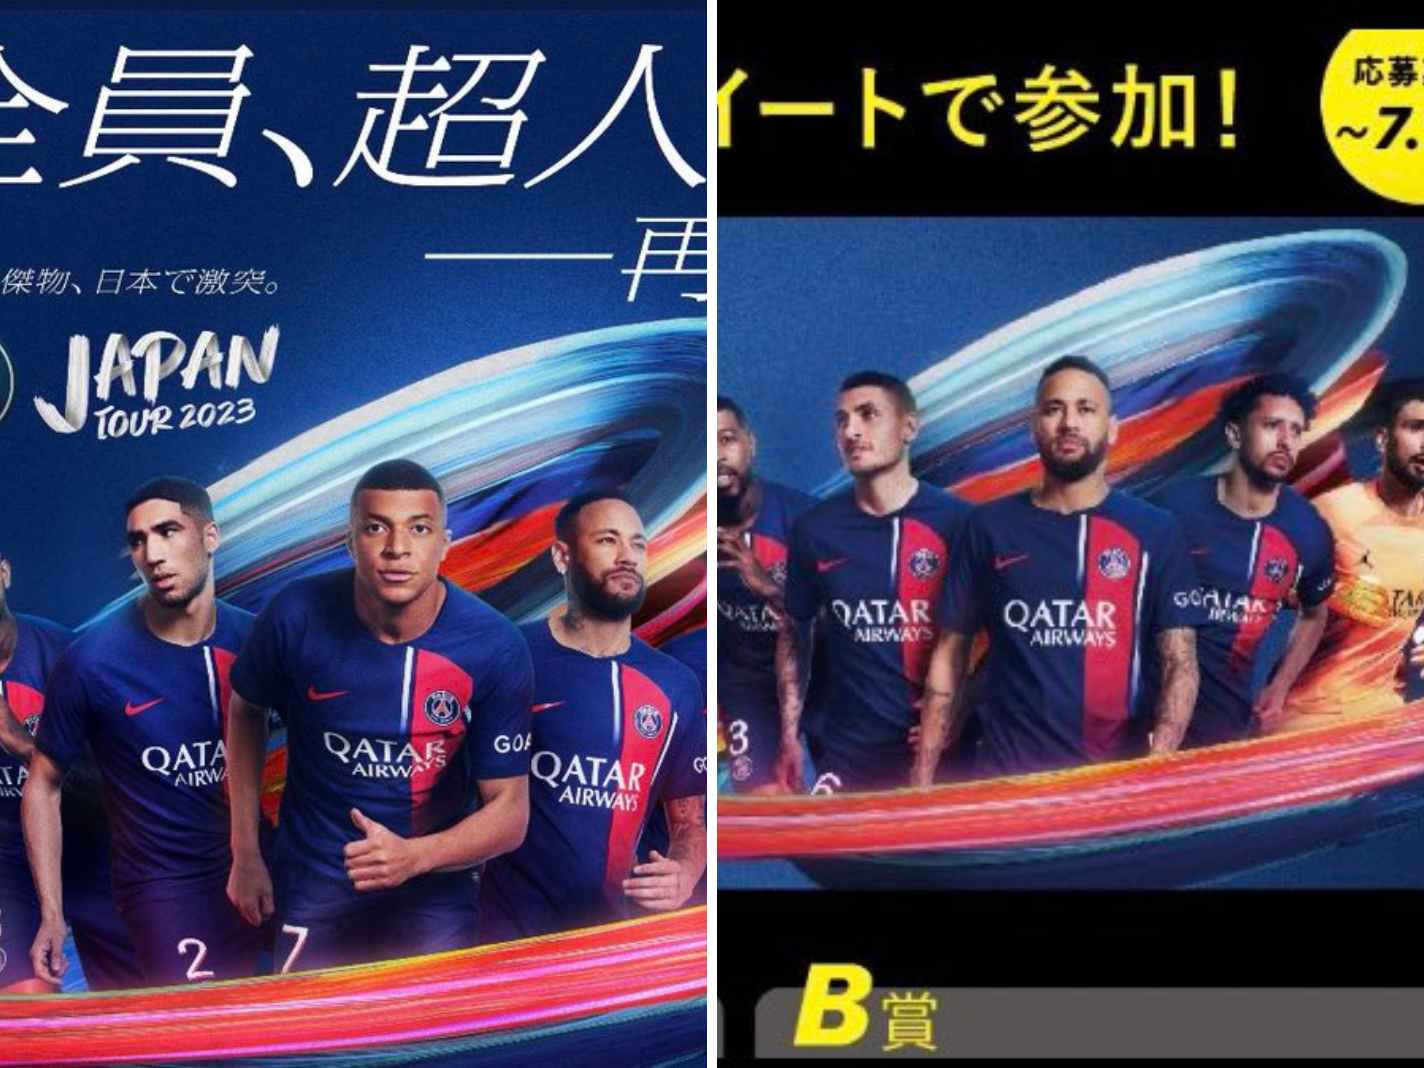 Explaining The Disappearance of Kylian Mbappe from Japan Tour Promo Pics